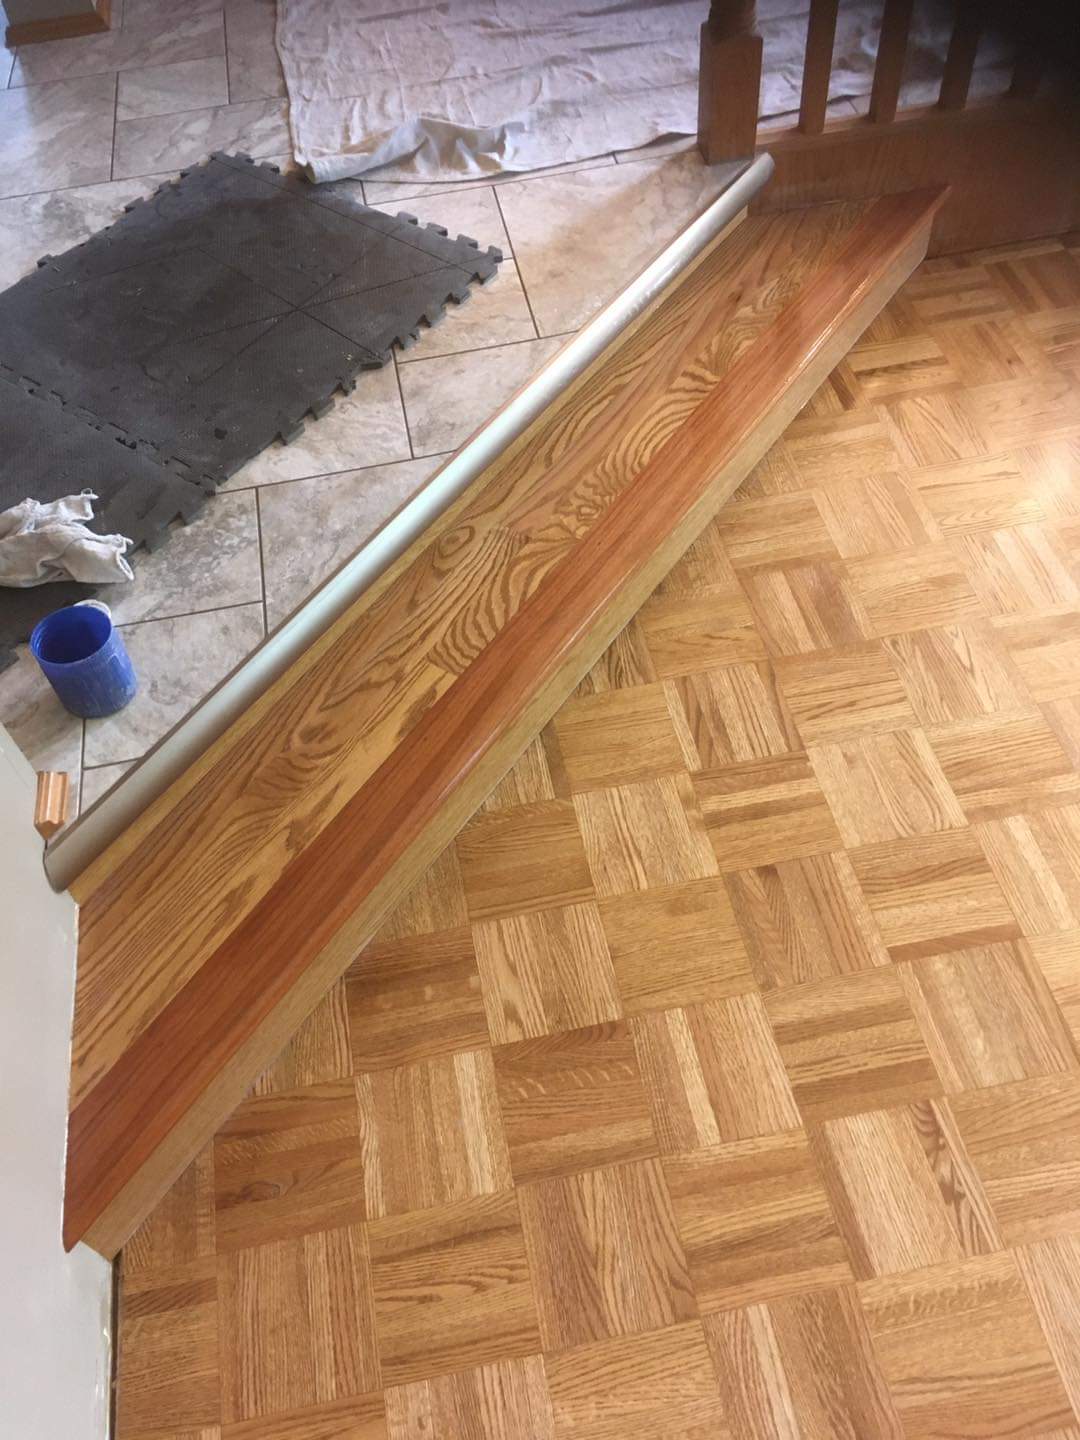 Great attention to detail was paid to installing the transition properly in this solid wood flooring job.